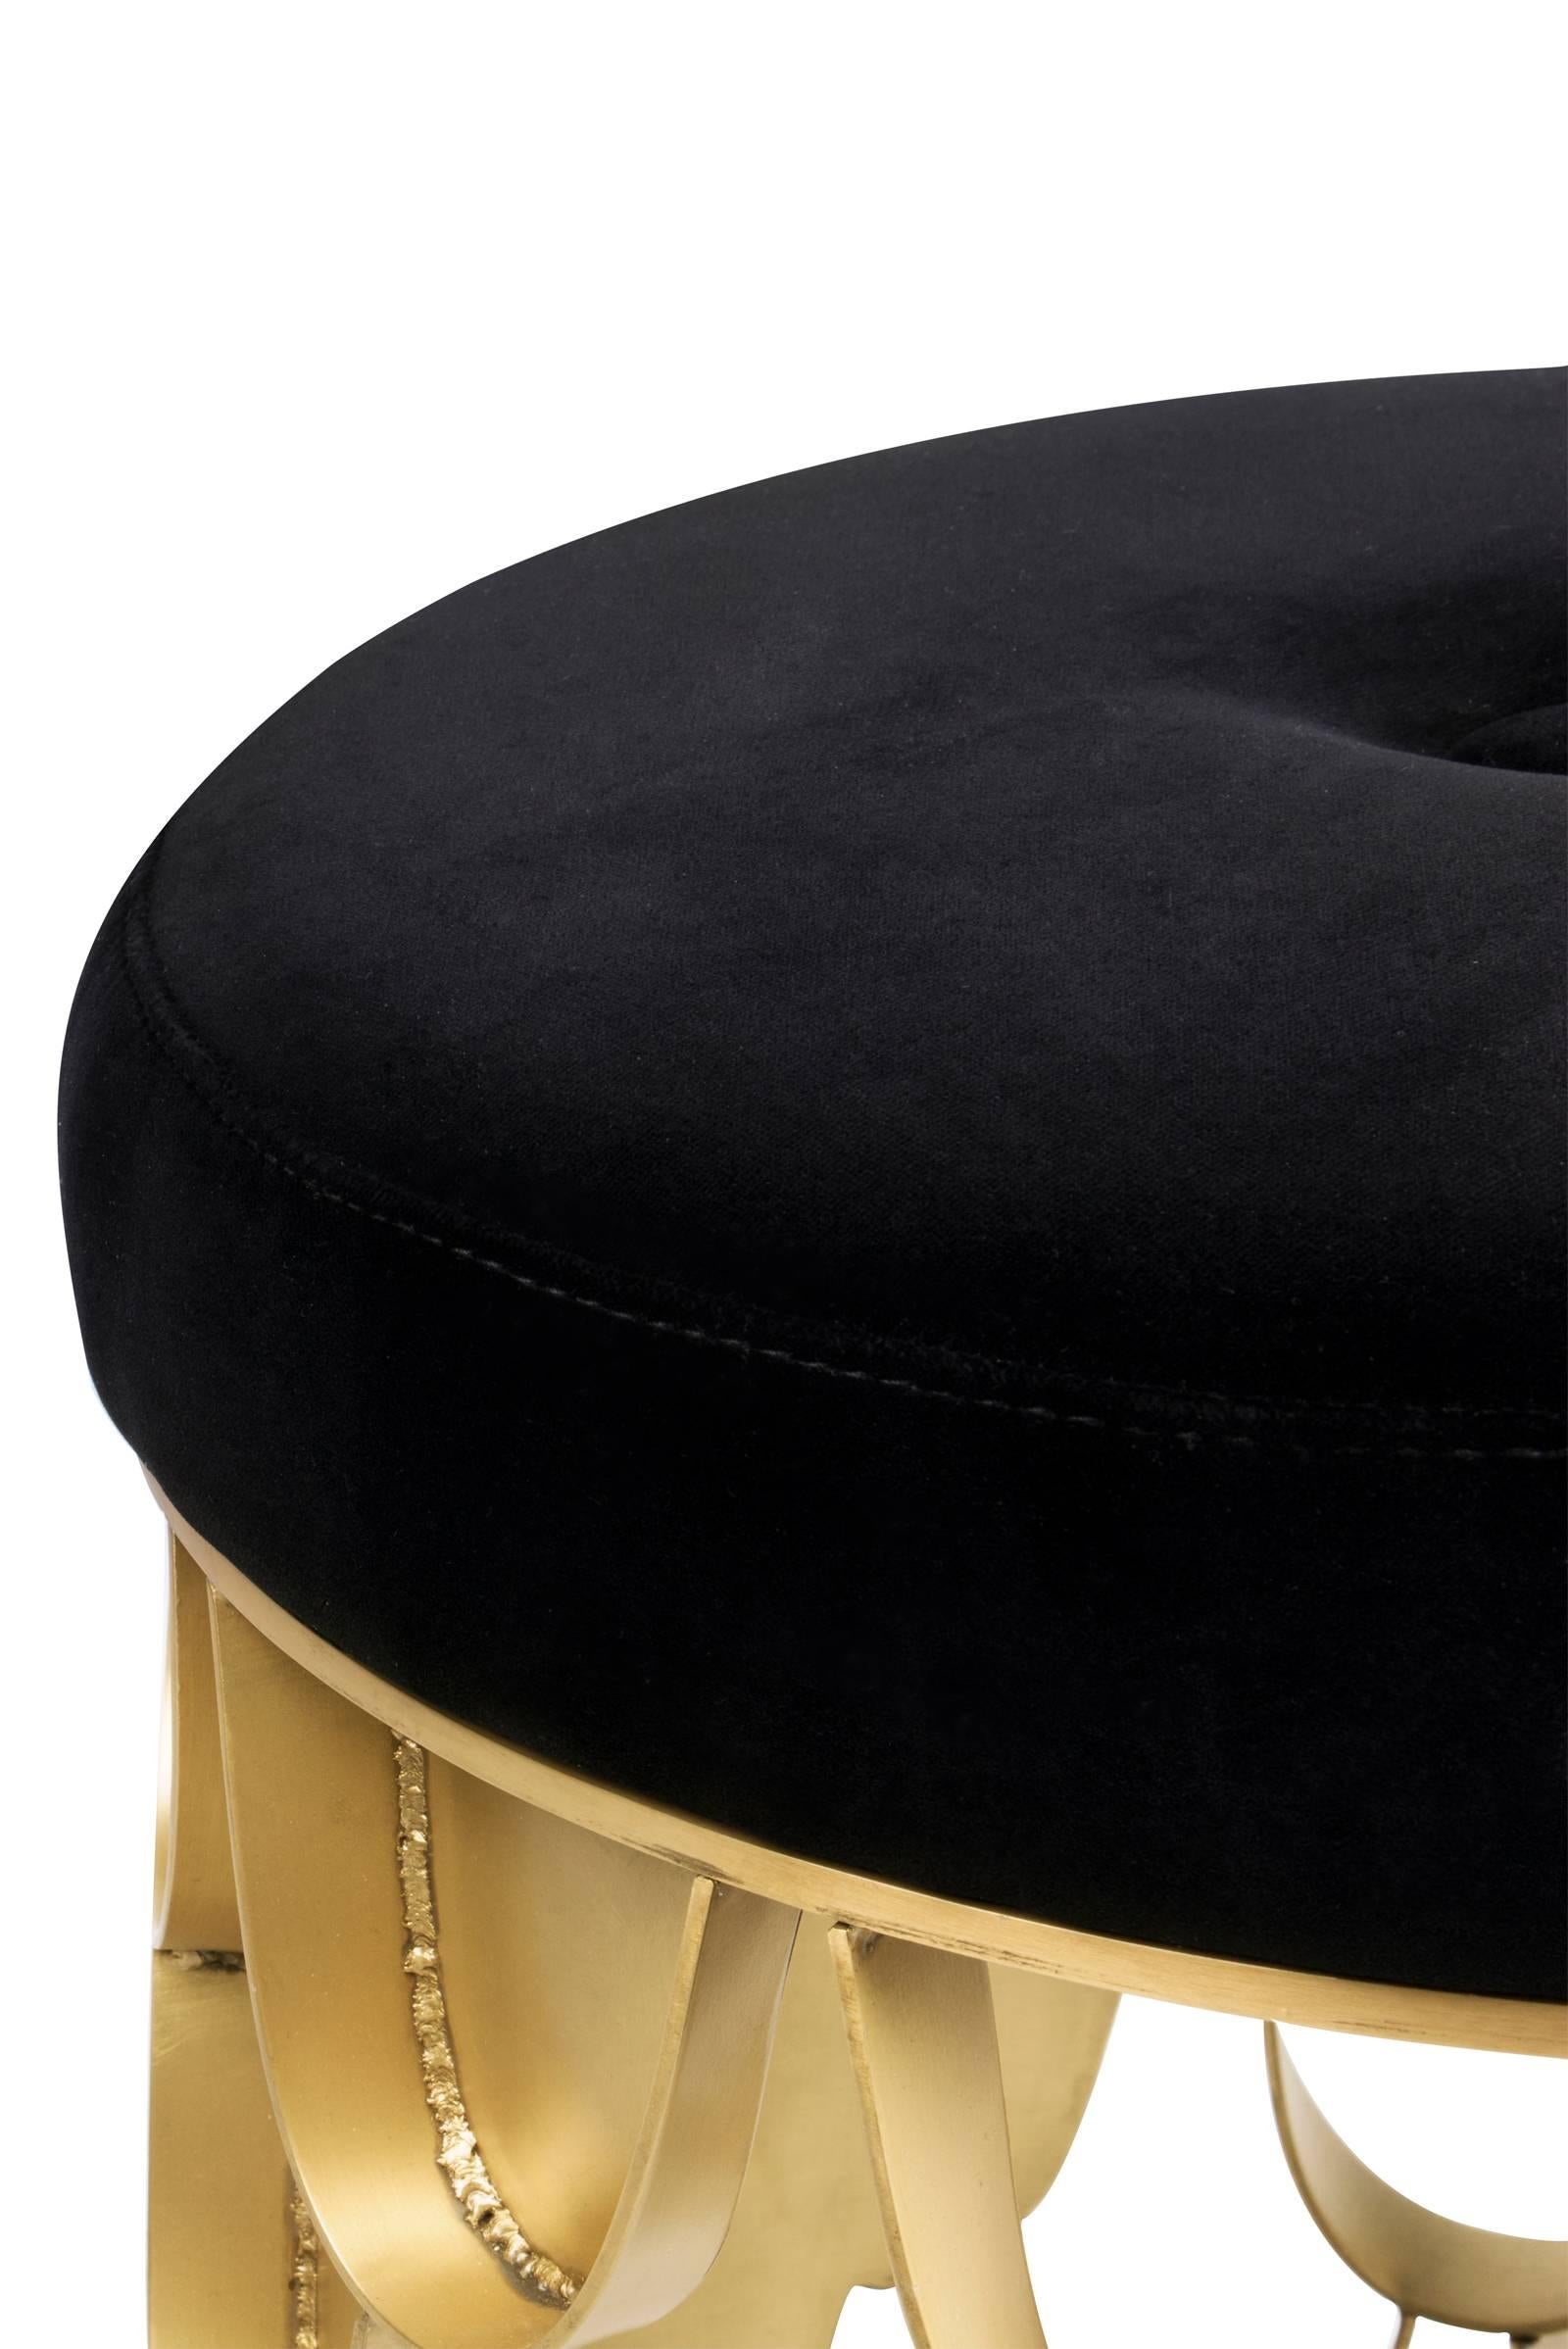 Carpus Stool in Brushed Aged Brass Base and Seat in Velvet Fabric For Sale 1